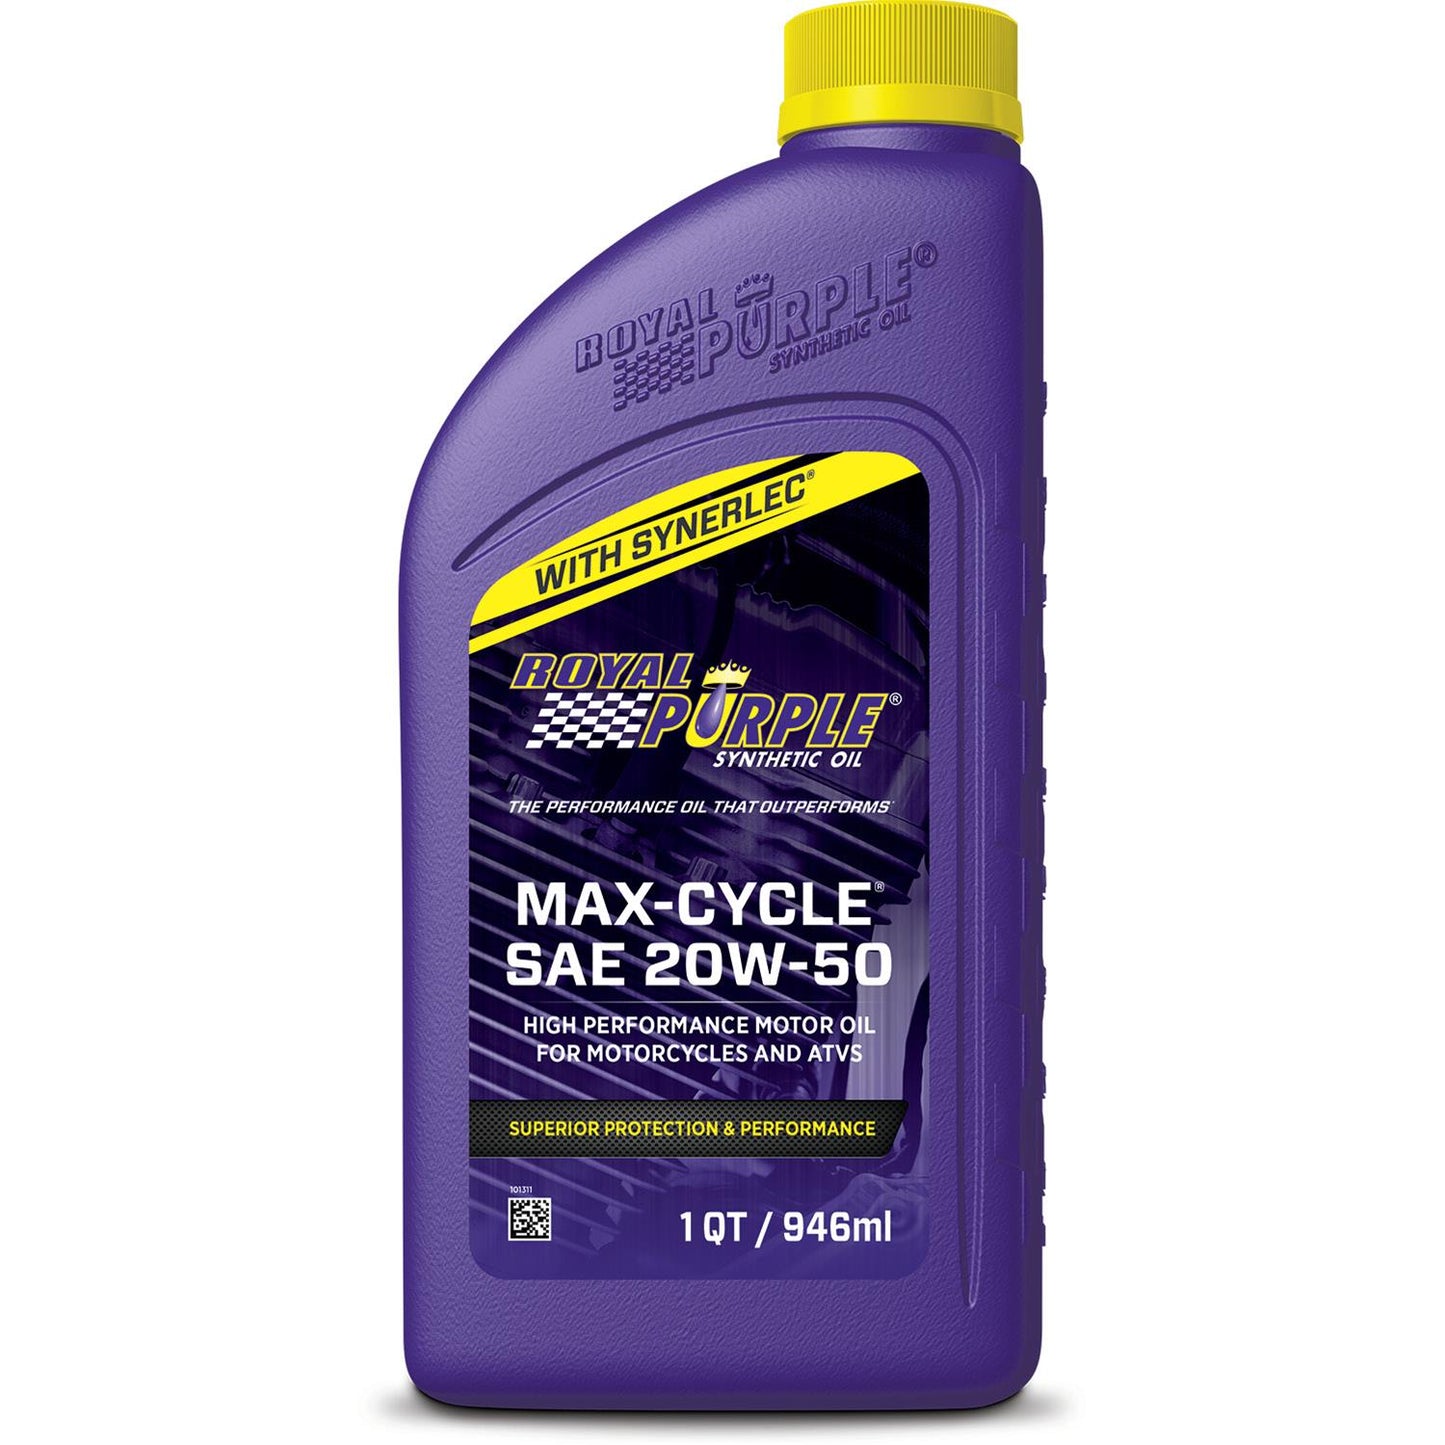 Max cycle 20w50